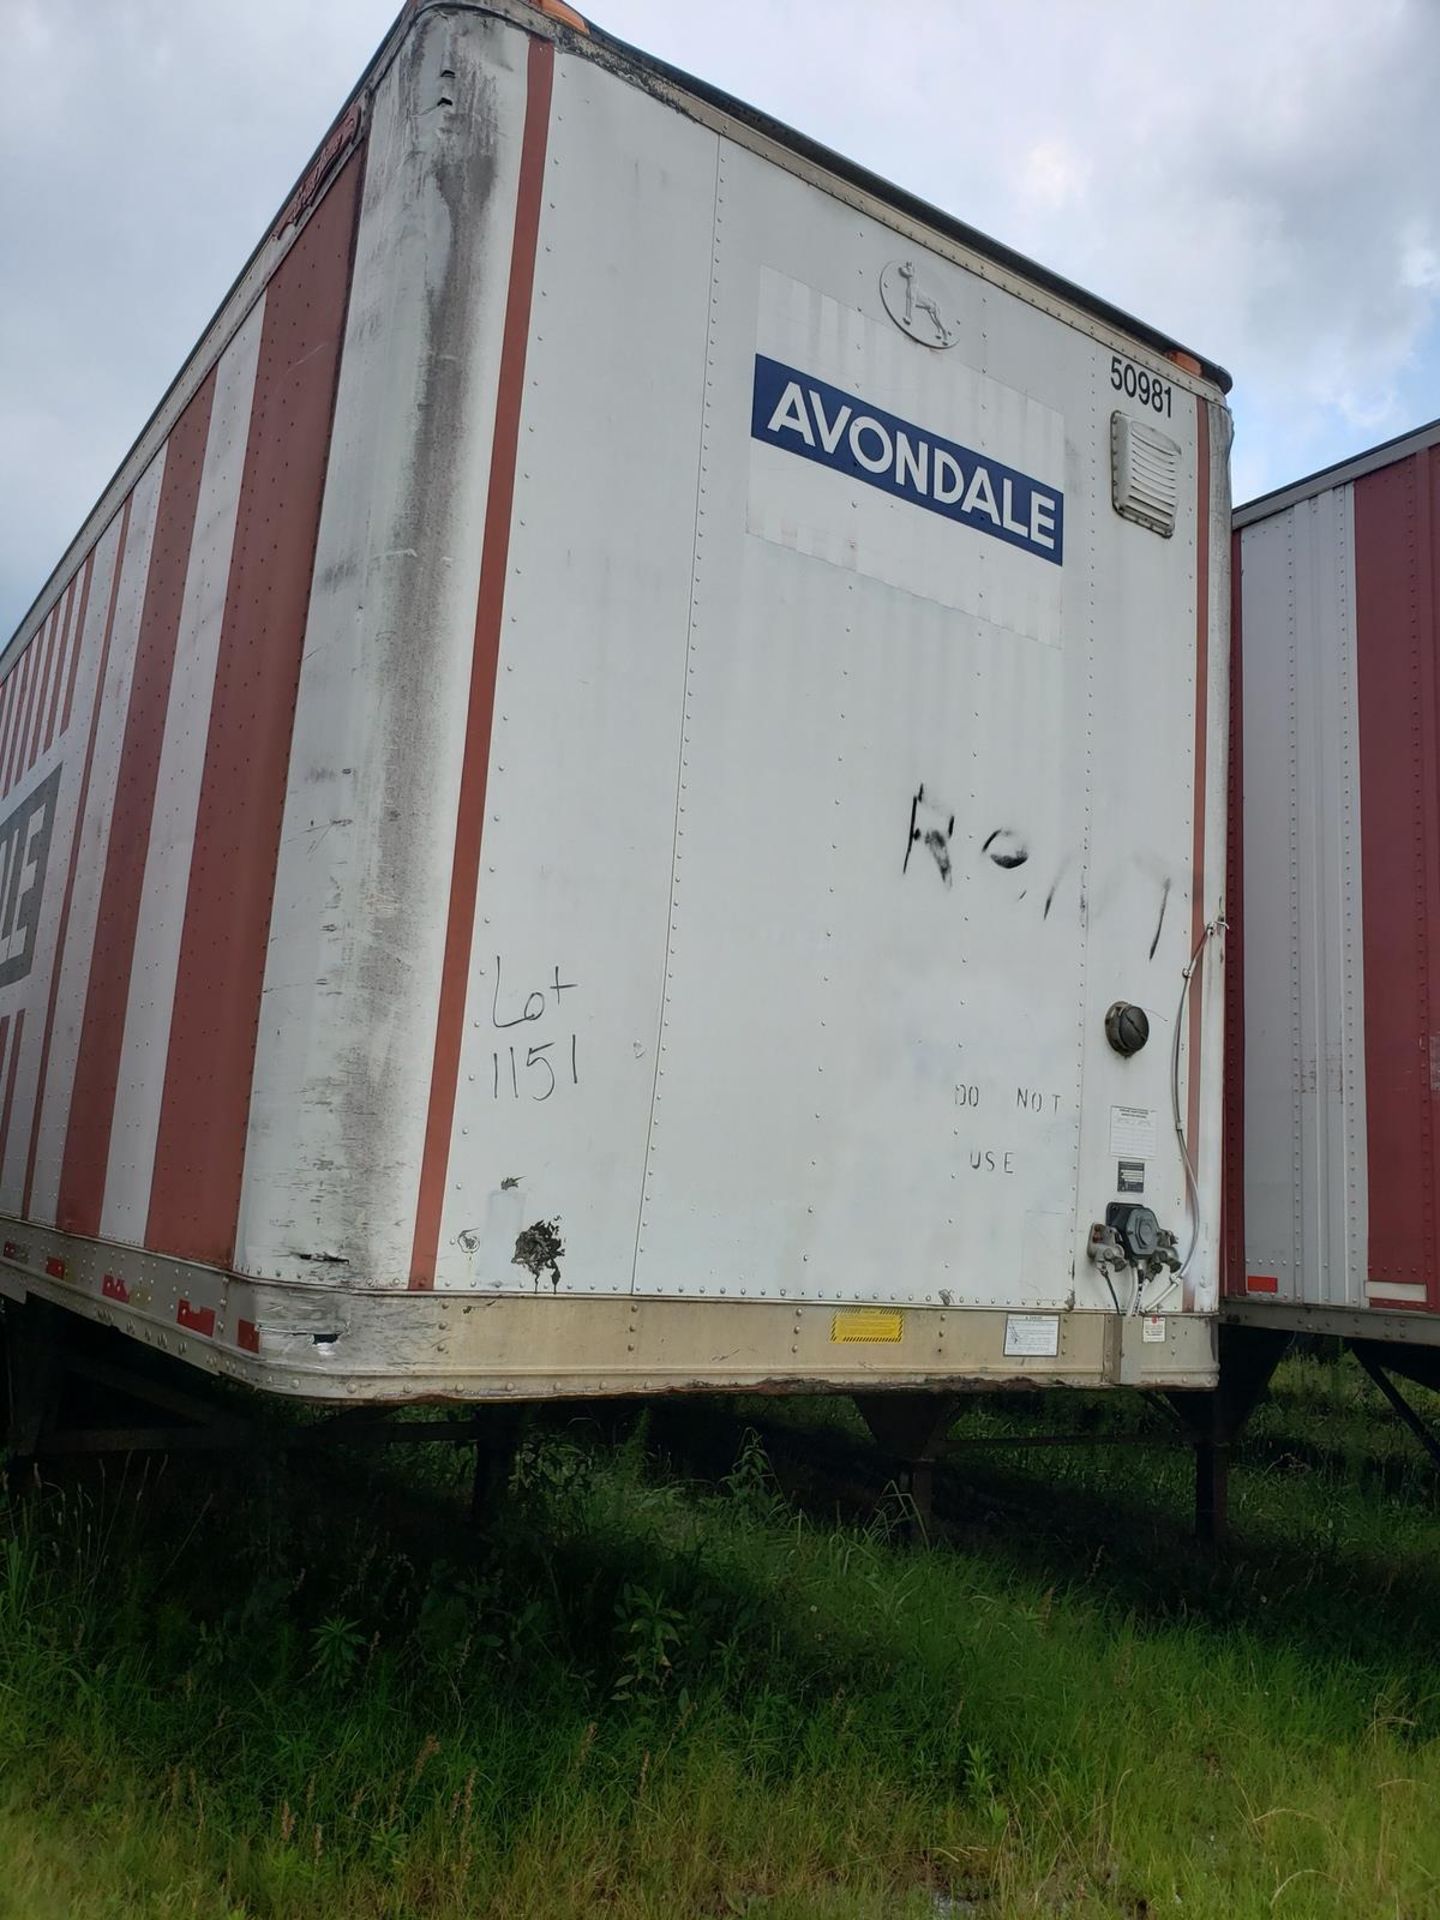 Dry Van Storage Trailer, Trailer # 50981. (No Title) Rig Fee: $Buyer To Remove